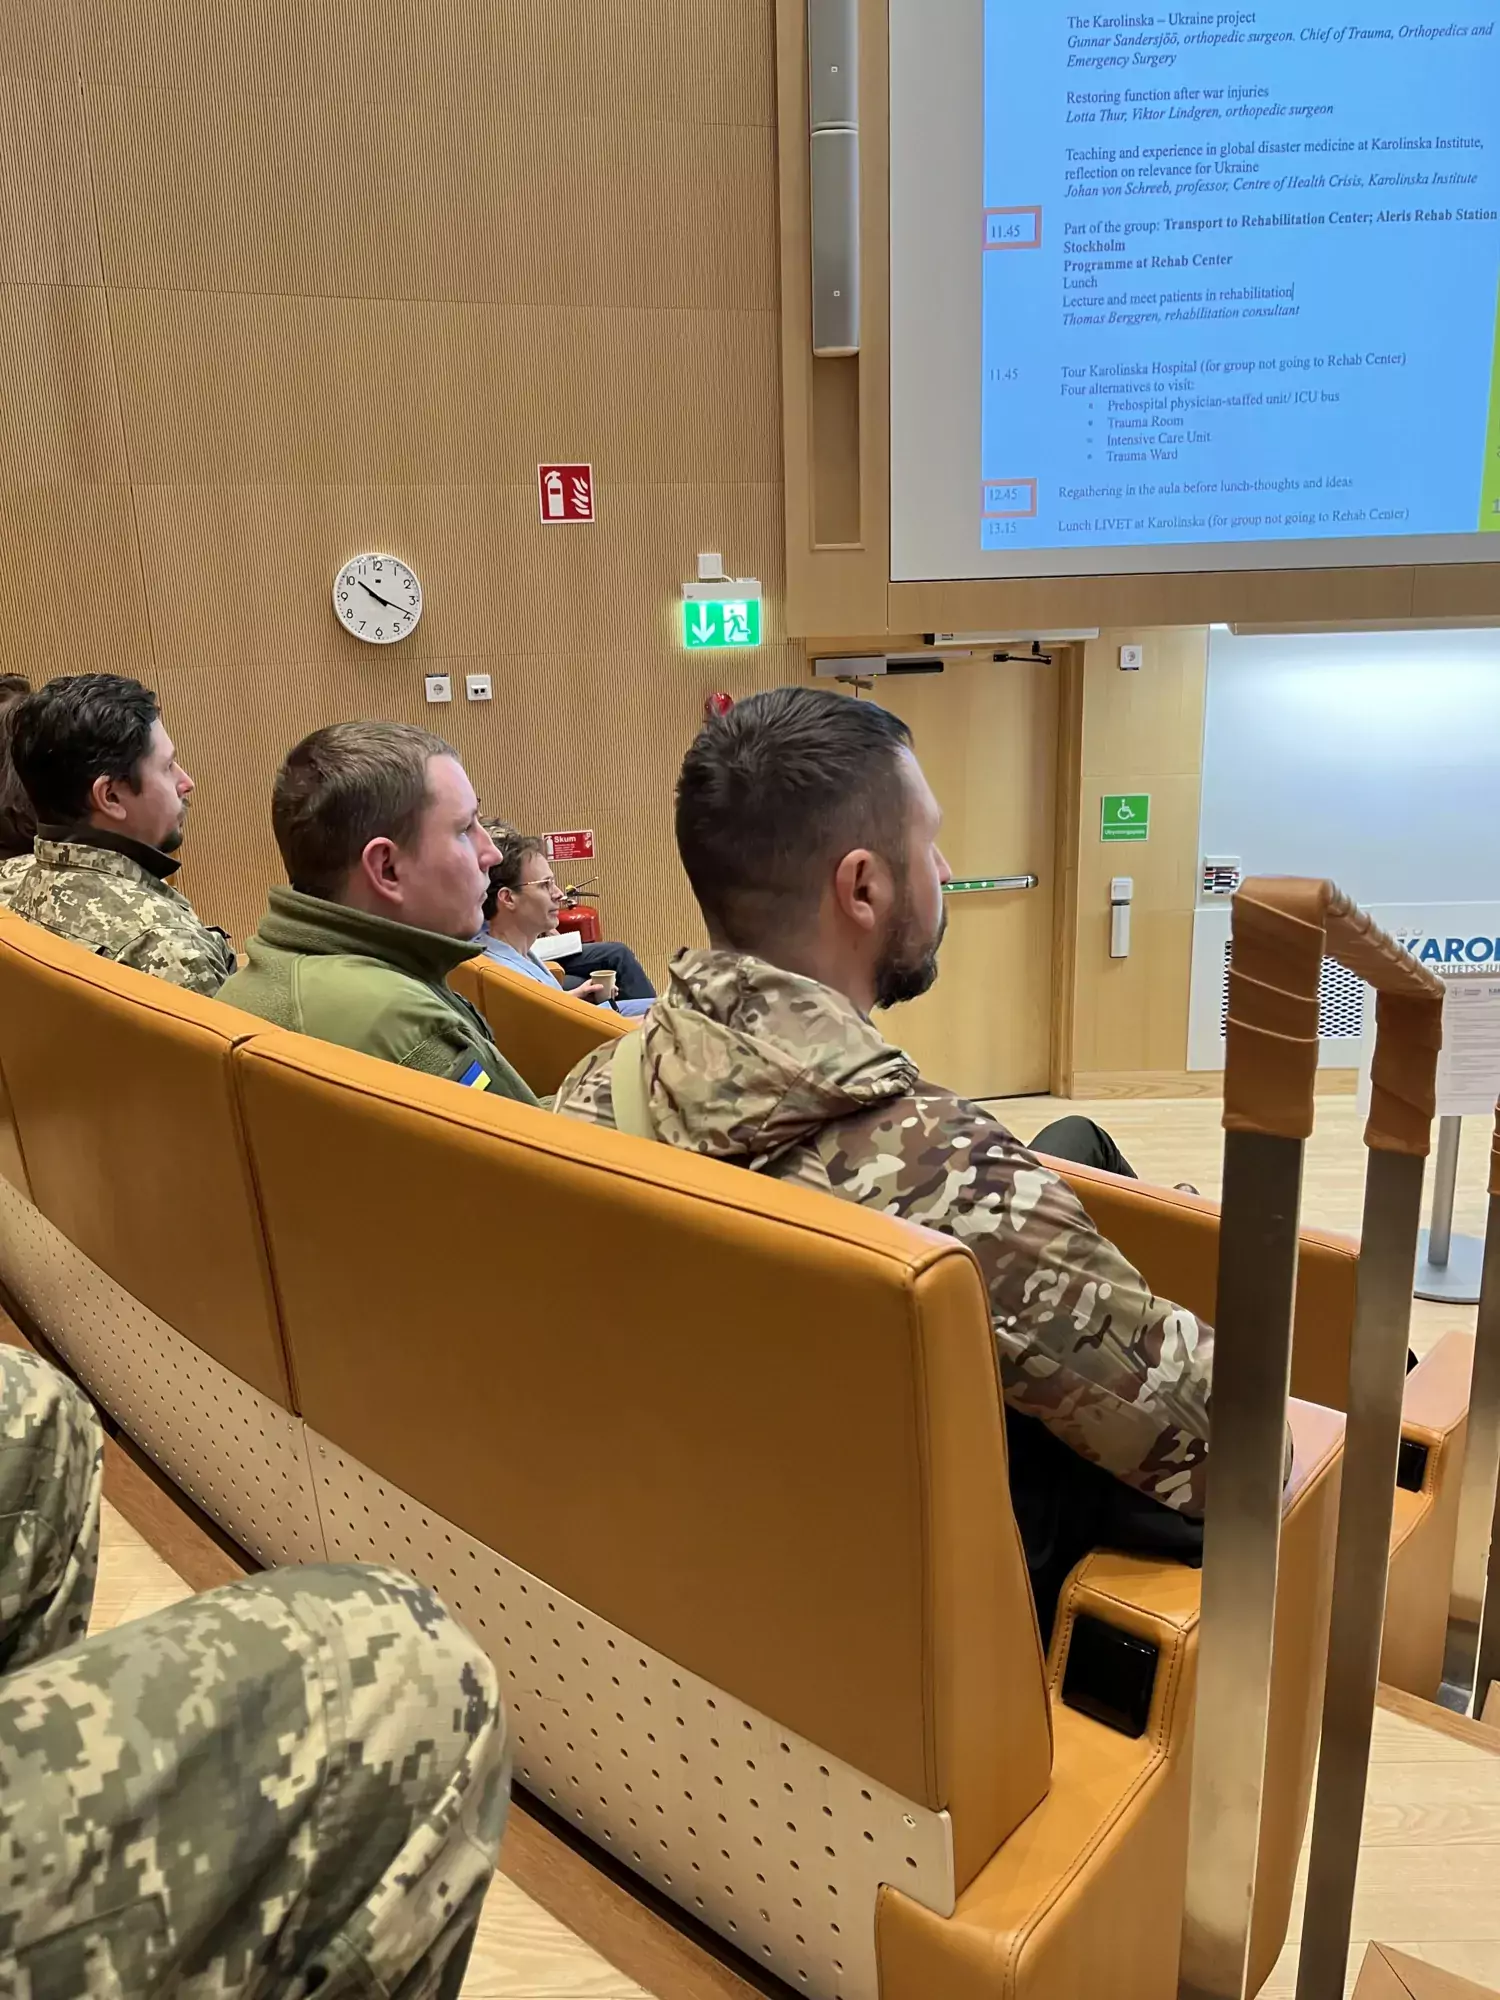 Soldiers in uniform sitting in a lecture theatre